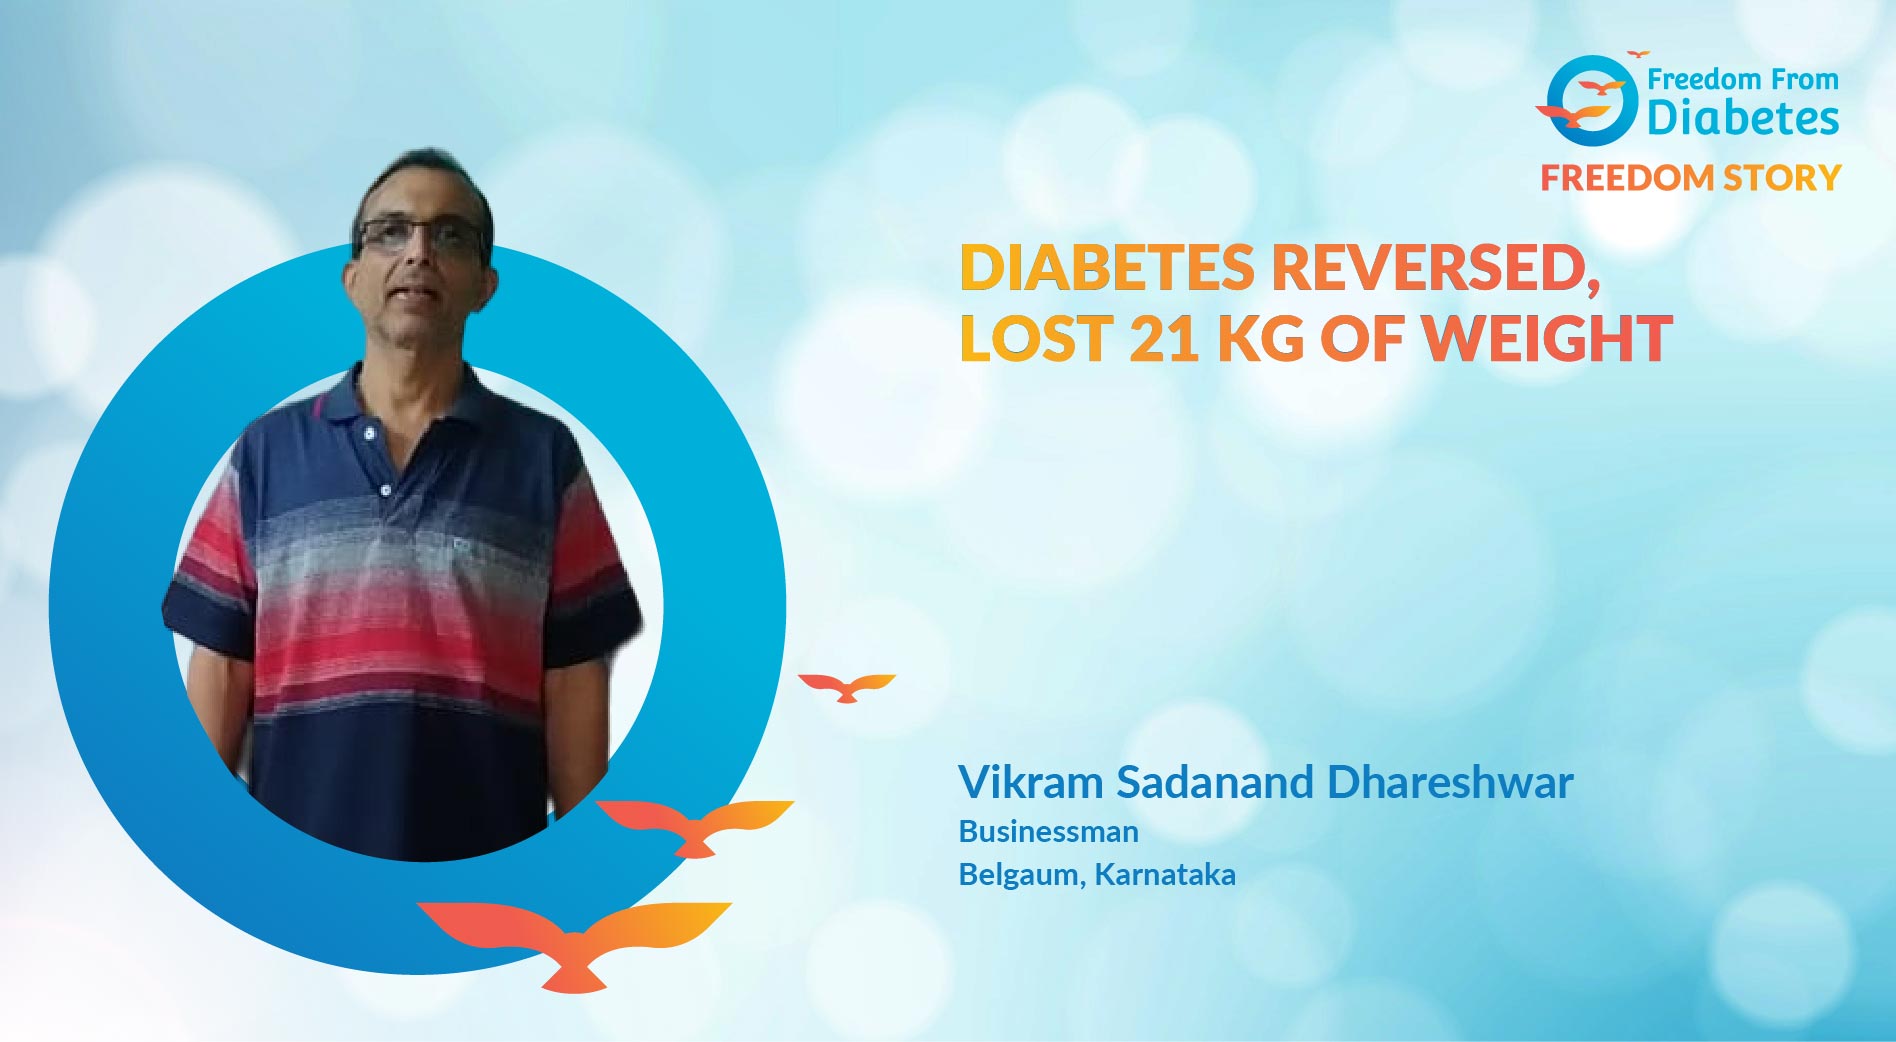 Amazing weight loss and diabetes reversal story